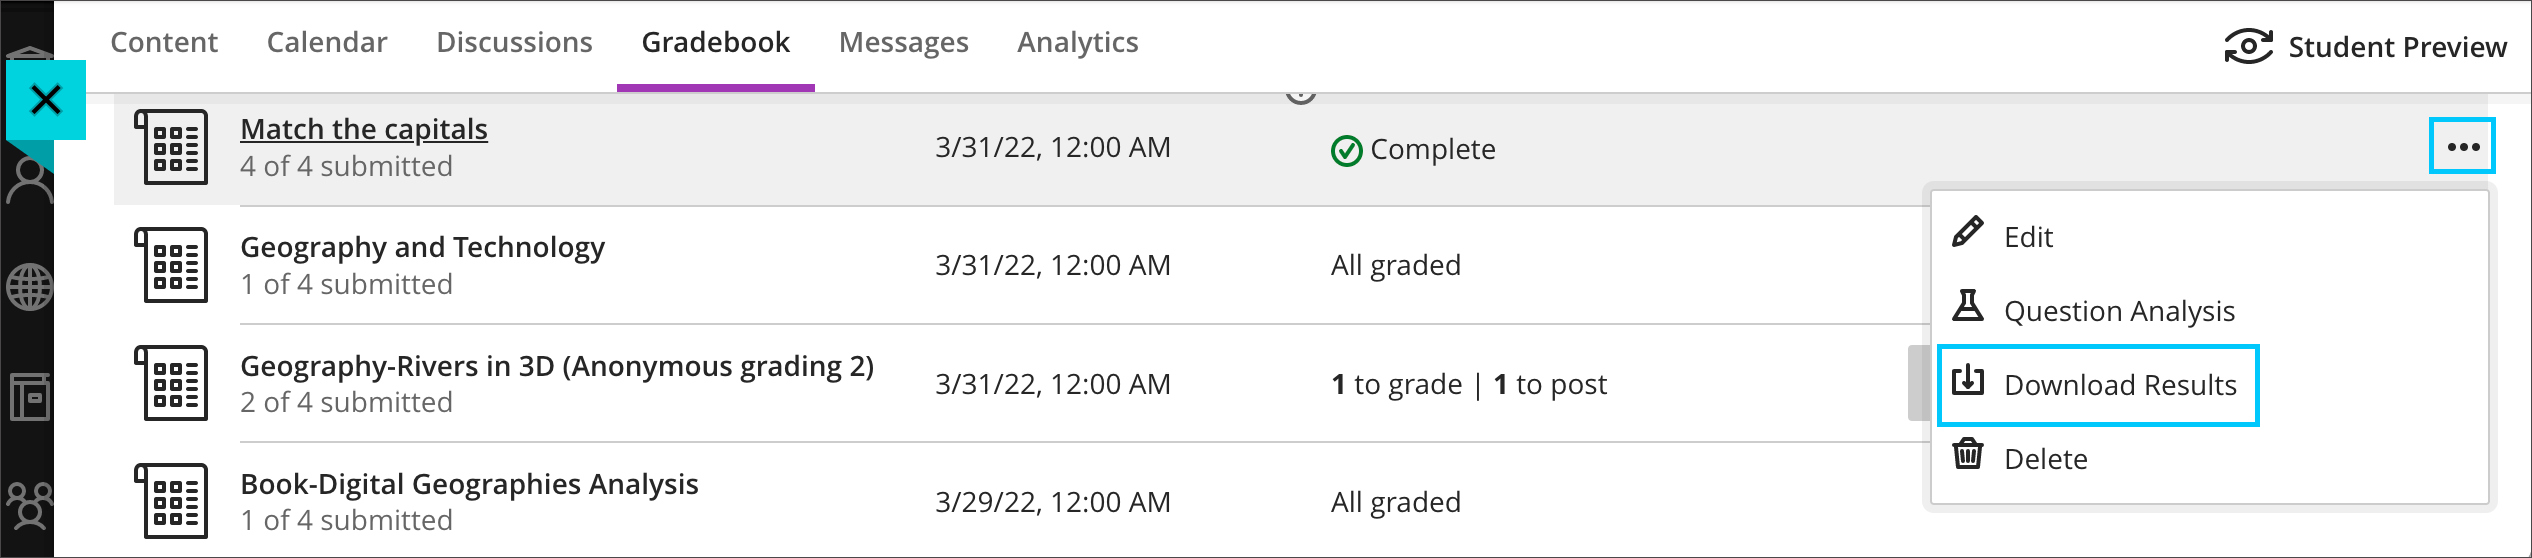 Download Assessment Results option from Gradebook list view.